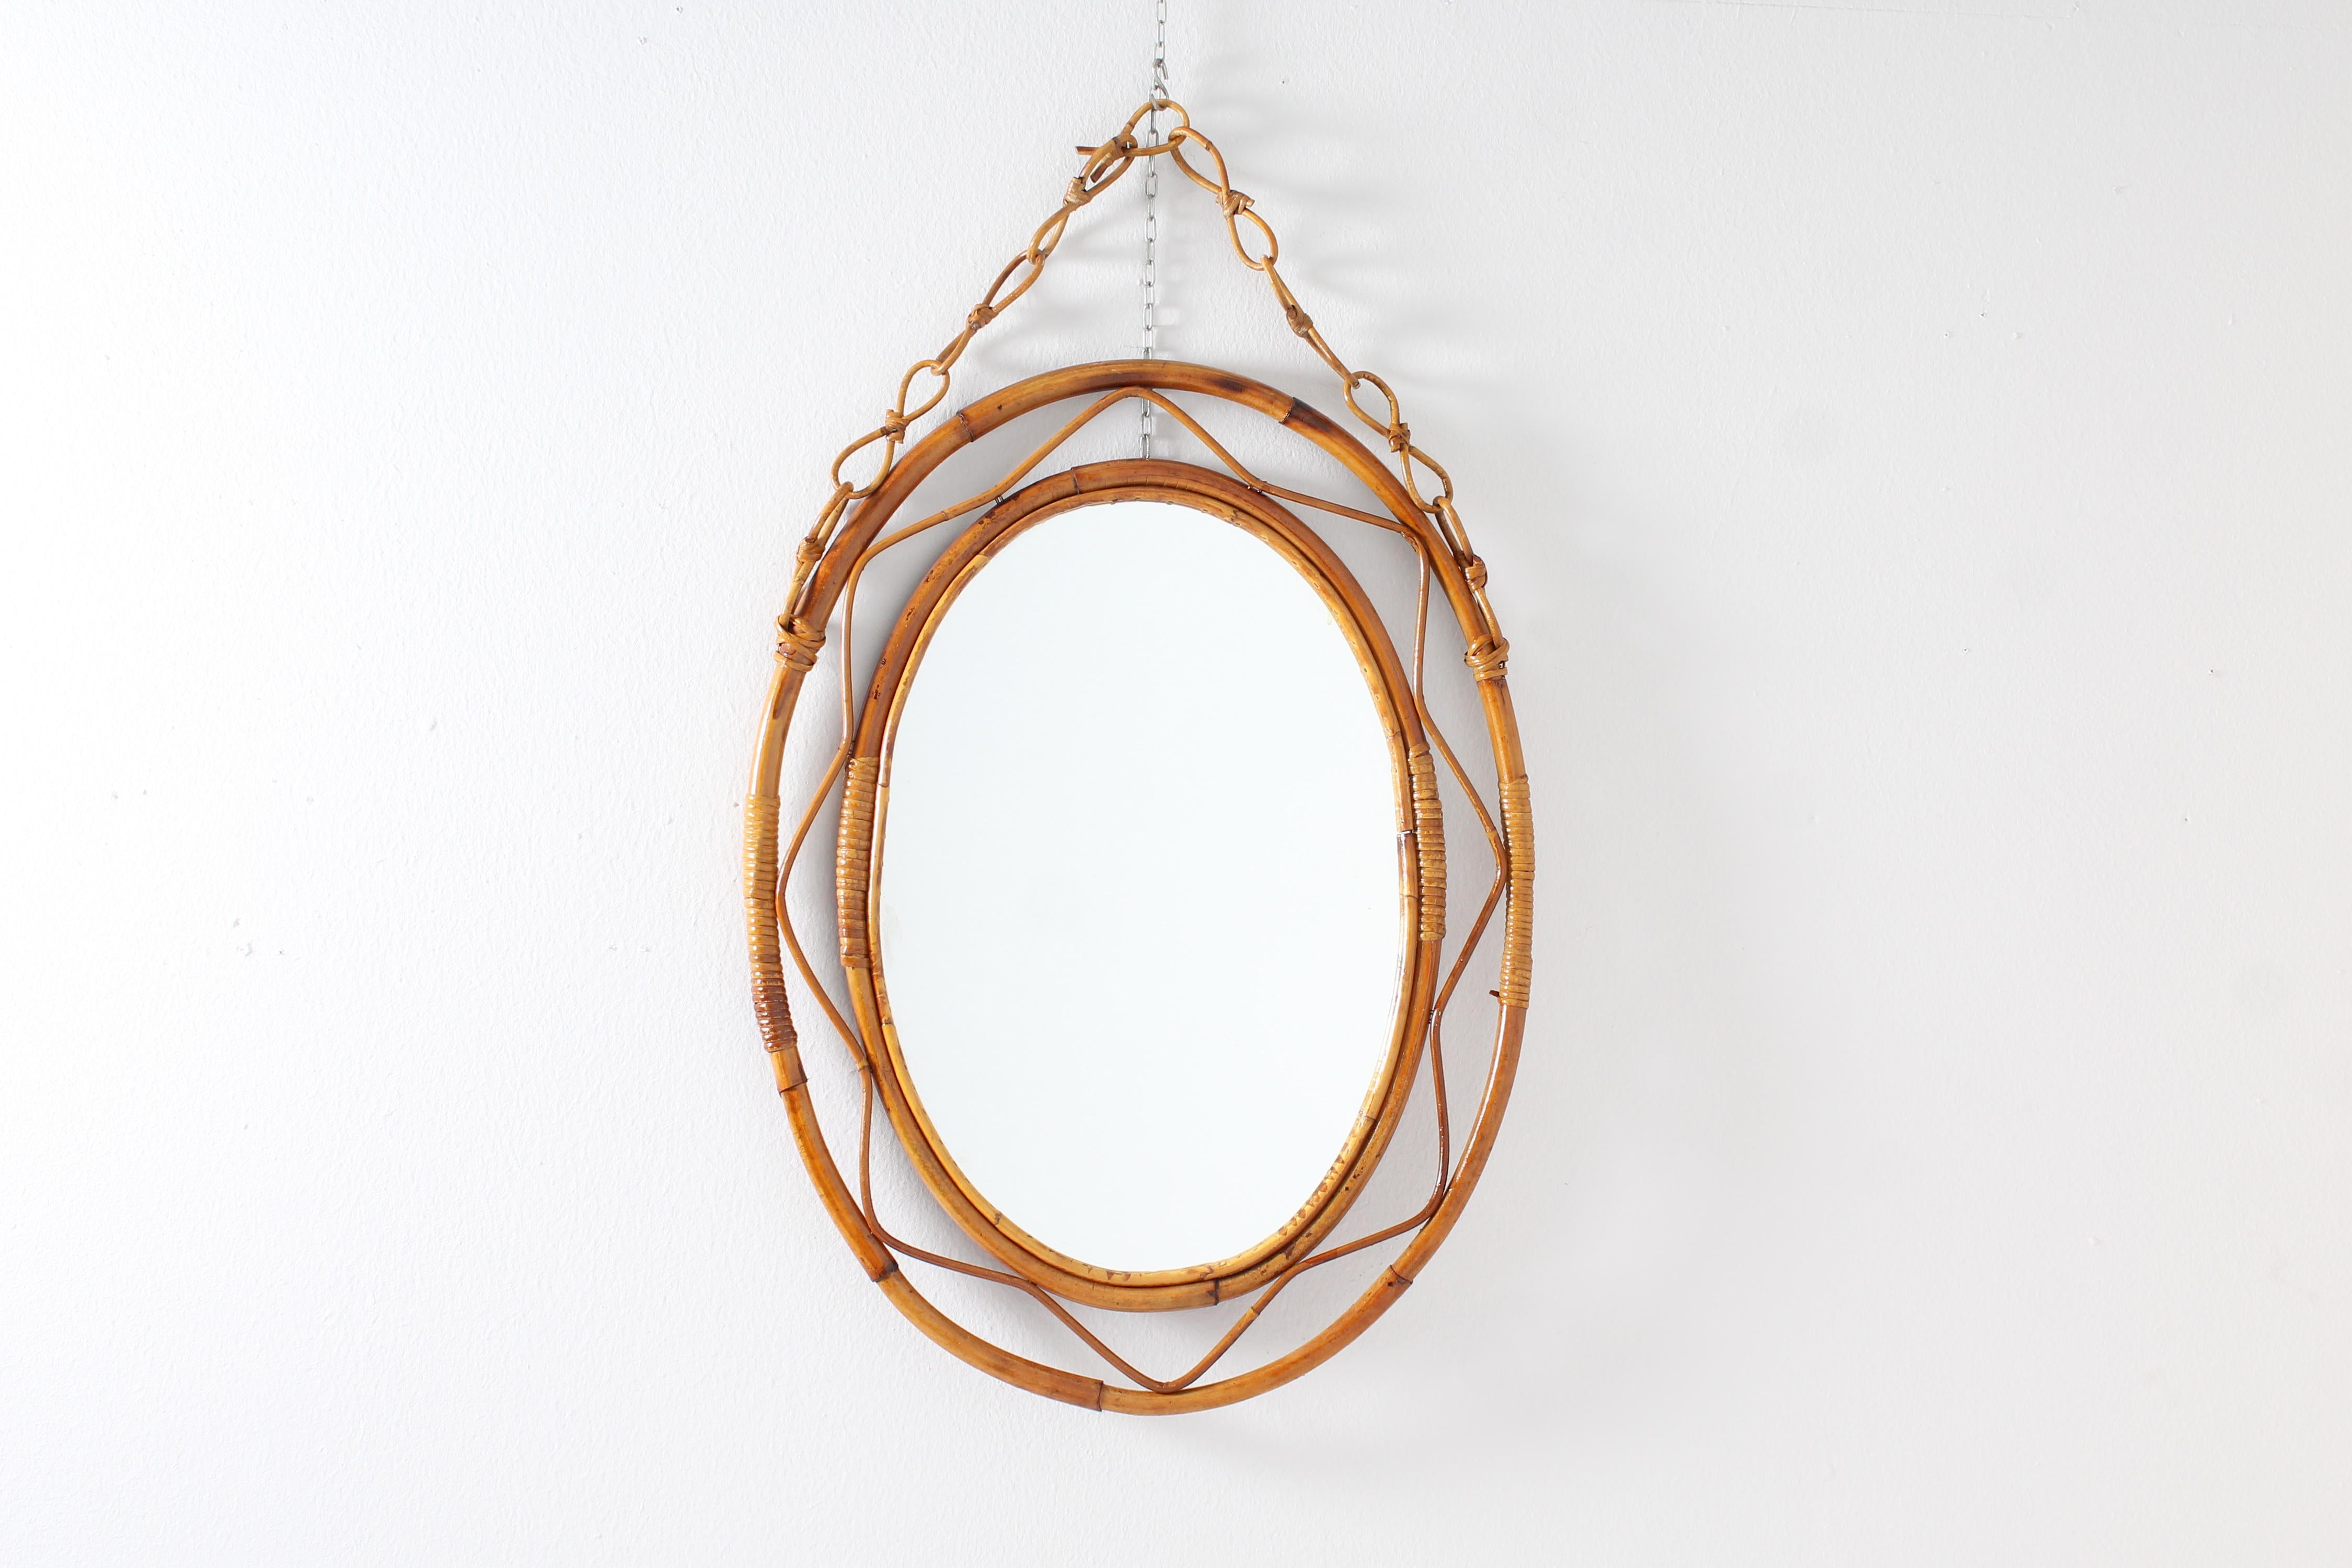 Stylish oval mirror with double frame and chain in curved bamboo cane and wicker band elements. Italian manufacture attributable to Bonacina, 1960s.
Wear consistent with age and use.